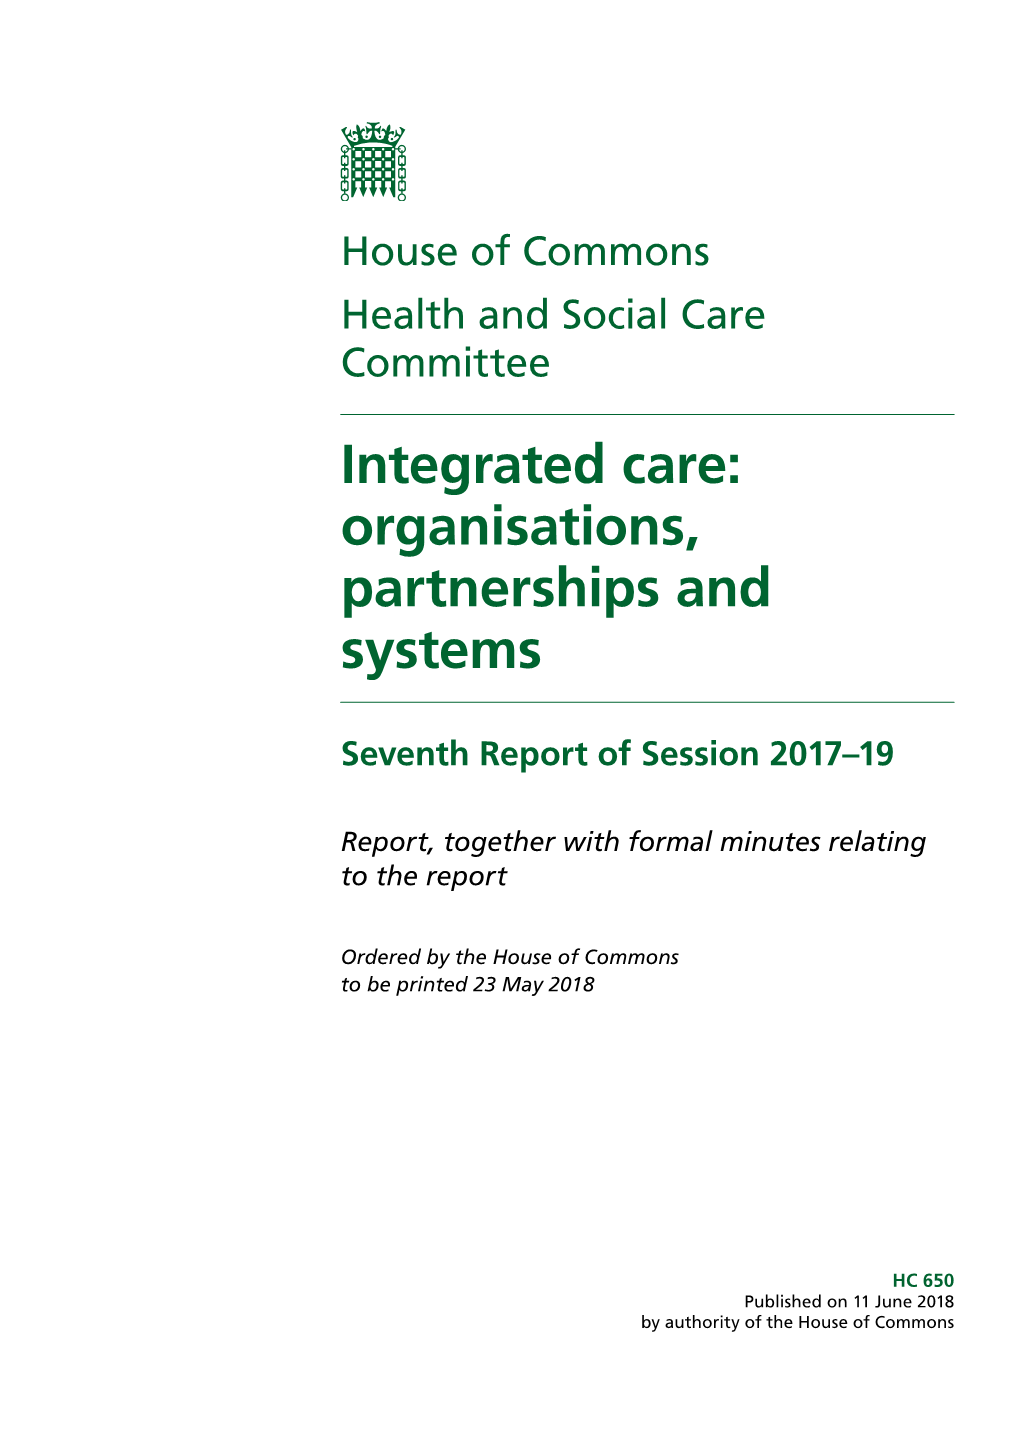 Integrated Care: Organisations, Partnerships and Systems